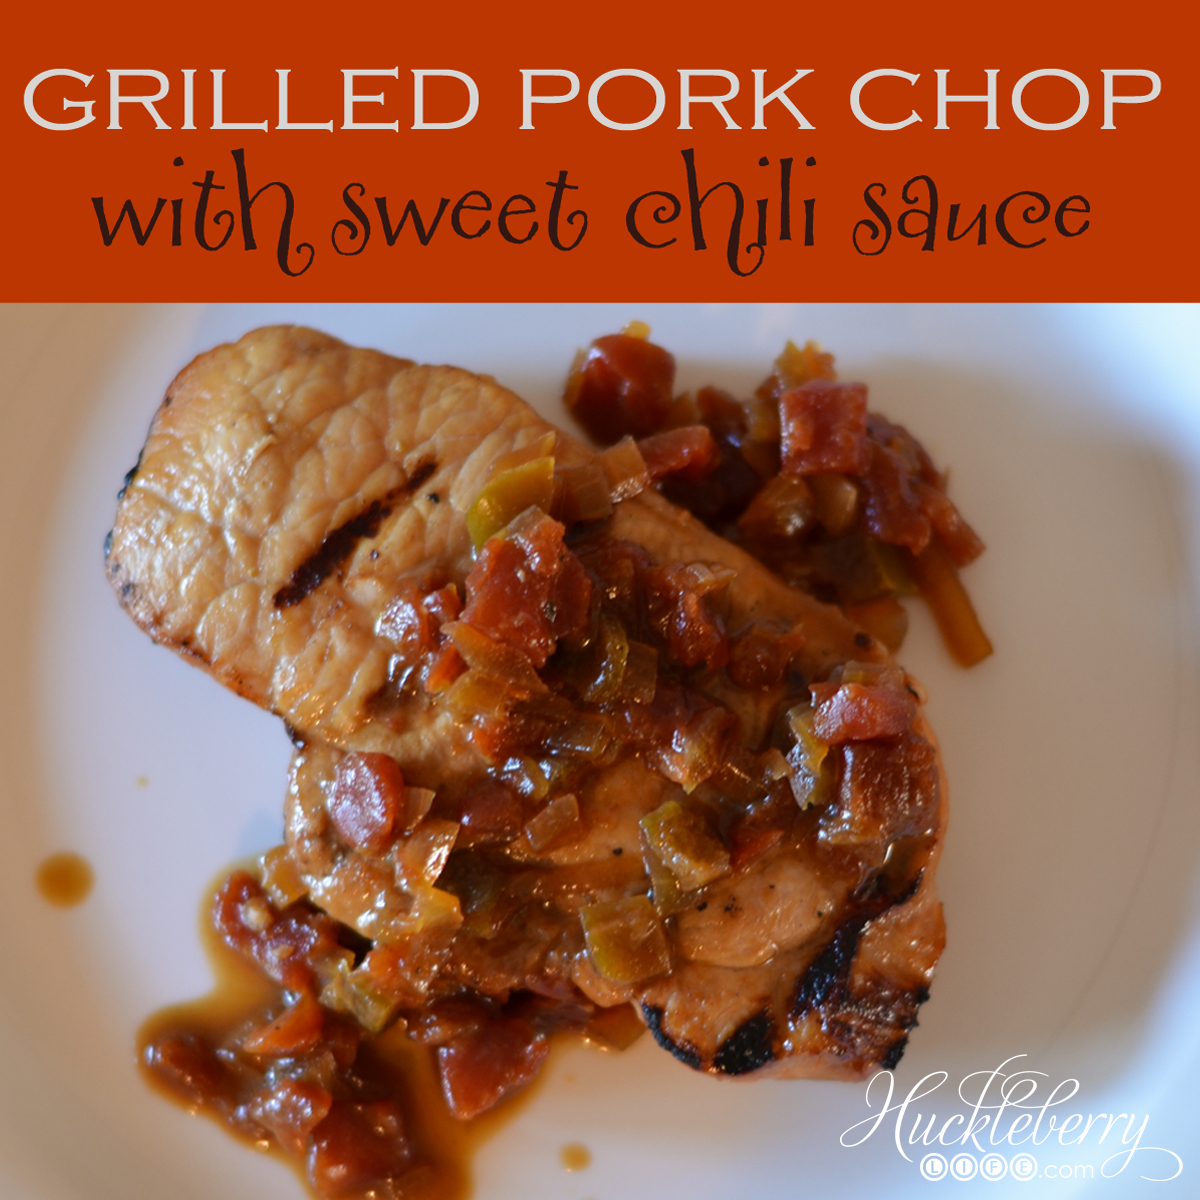 grilled pork chop with sweet chili sauce | HUCKLEBERRY LIFE